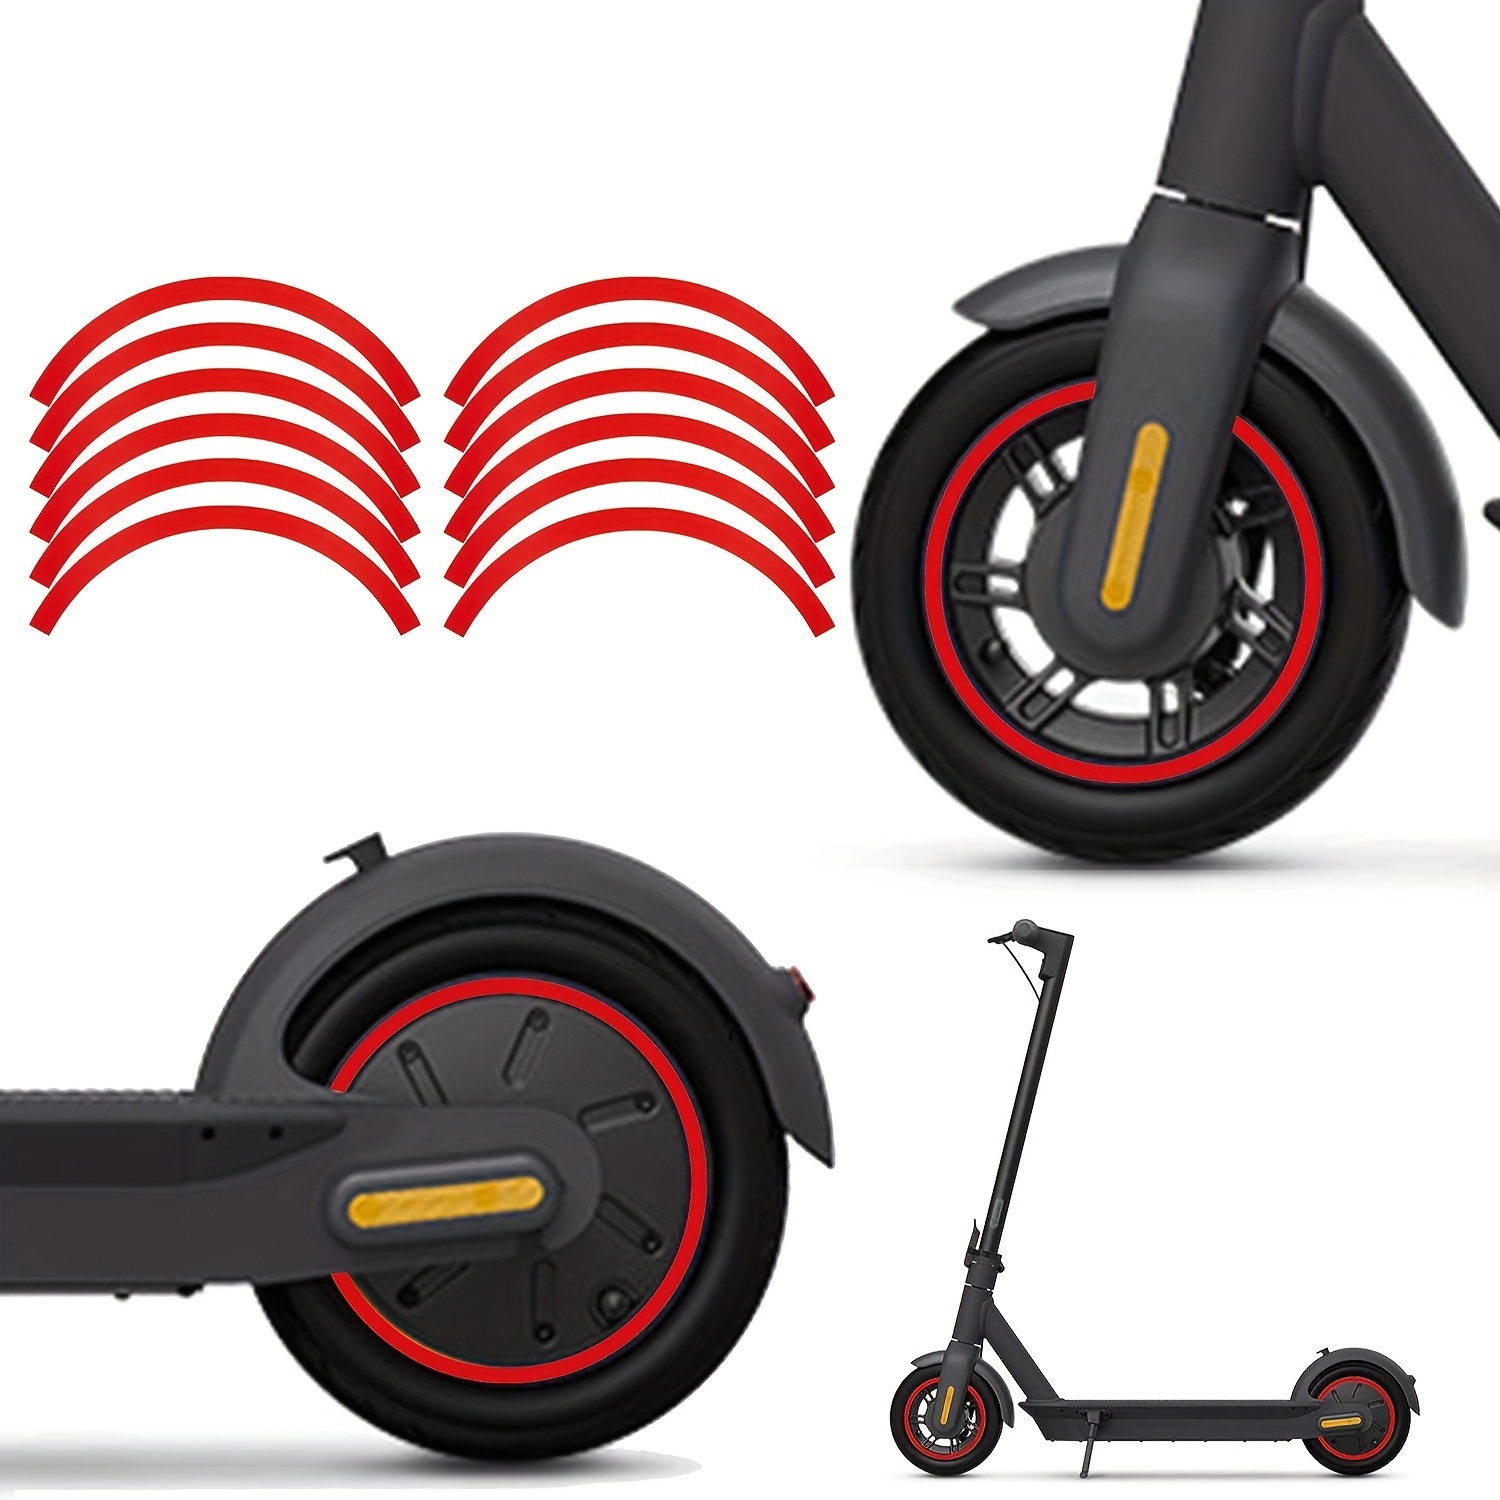 100% Electric Car Bike Scooter Sticker Vinyl Decal Adhesive 